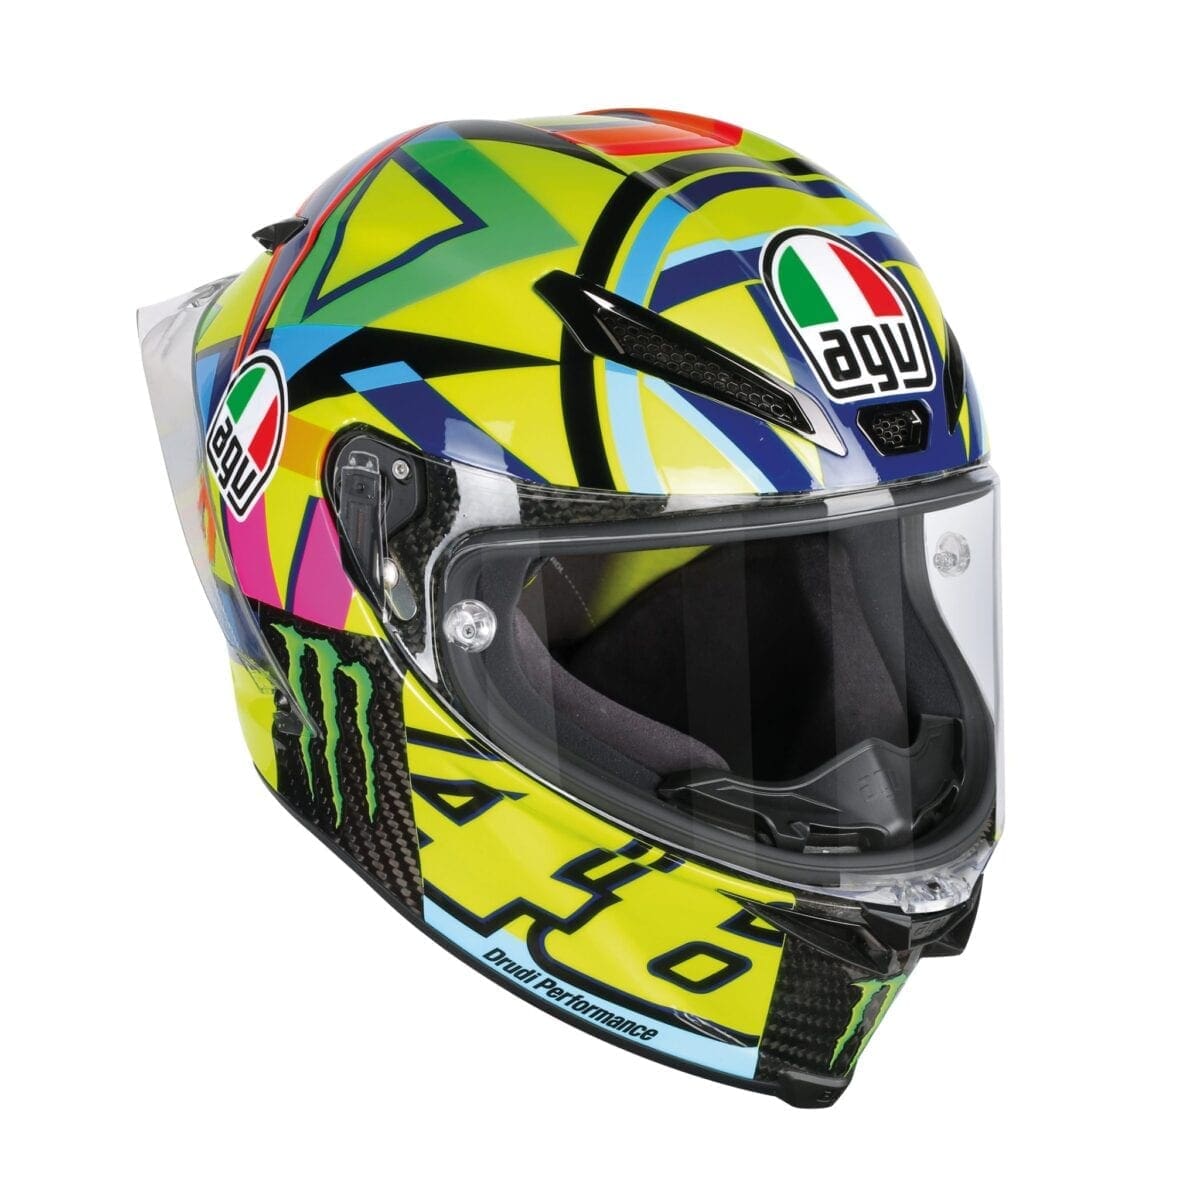 For the Rossi fan who has everything, here’s the AGV Pista GP-R Soleluna – it’s a cool £999.99